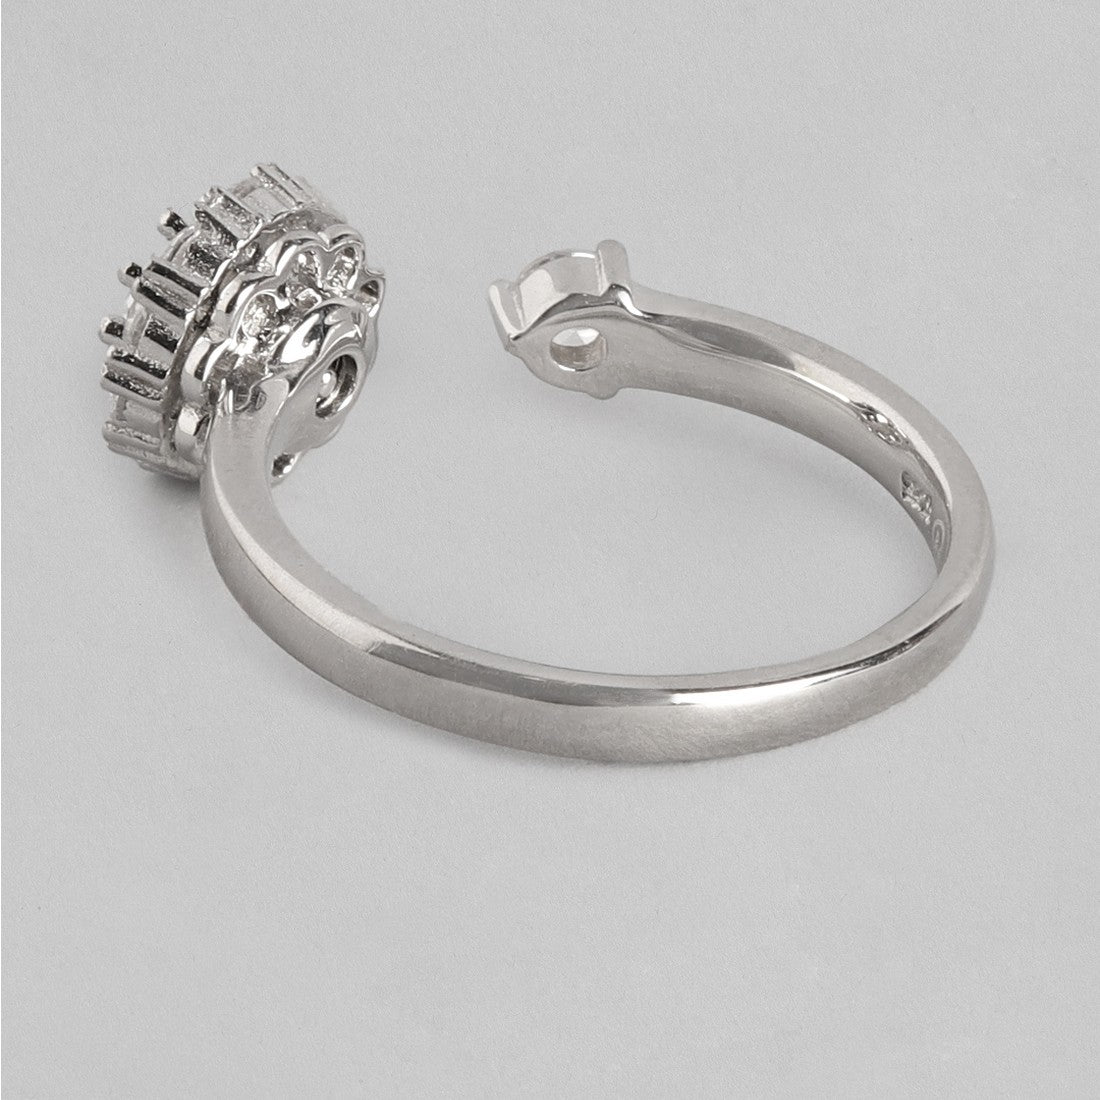 The Rotating 925 Silver Ring (Adjustable)